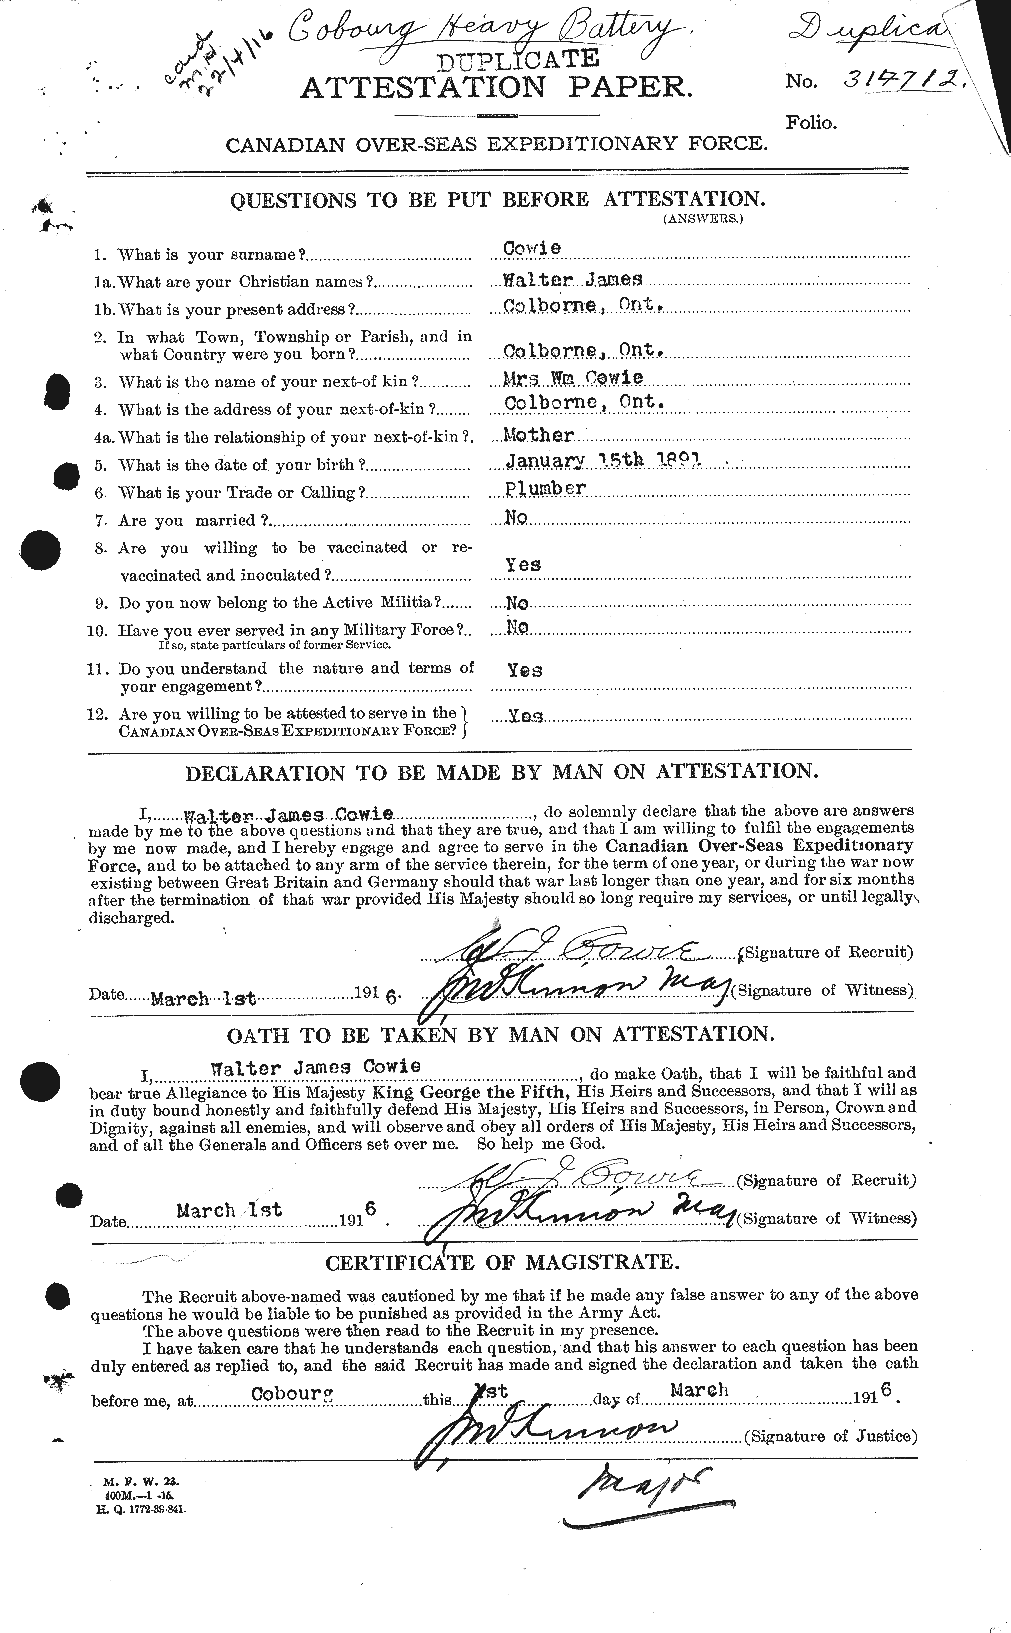 Personnel Records of the First World War - CEF 059869a